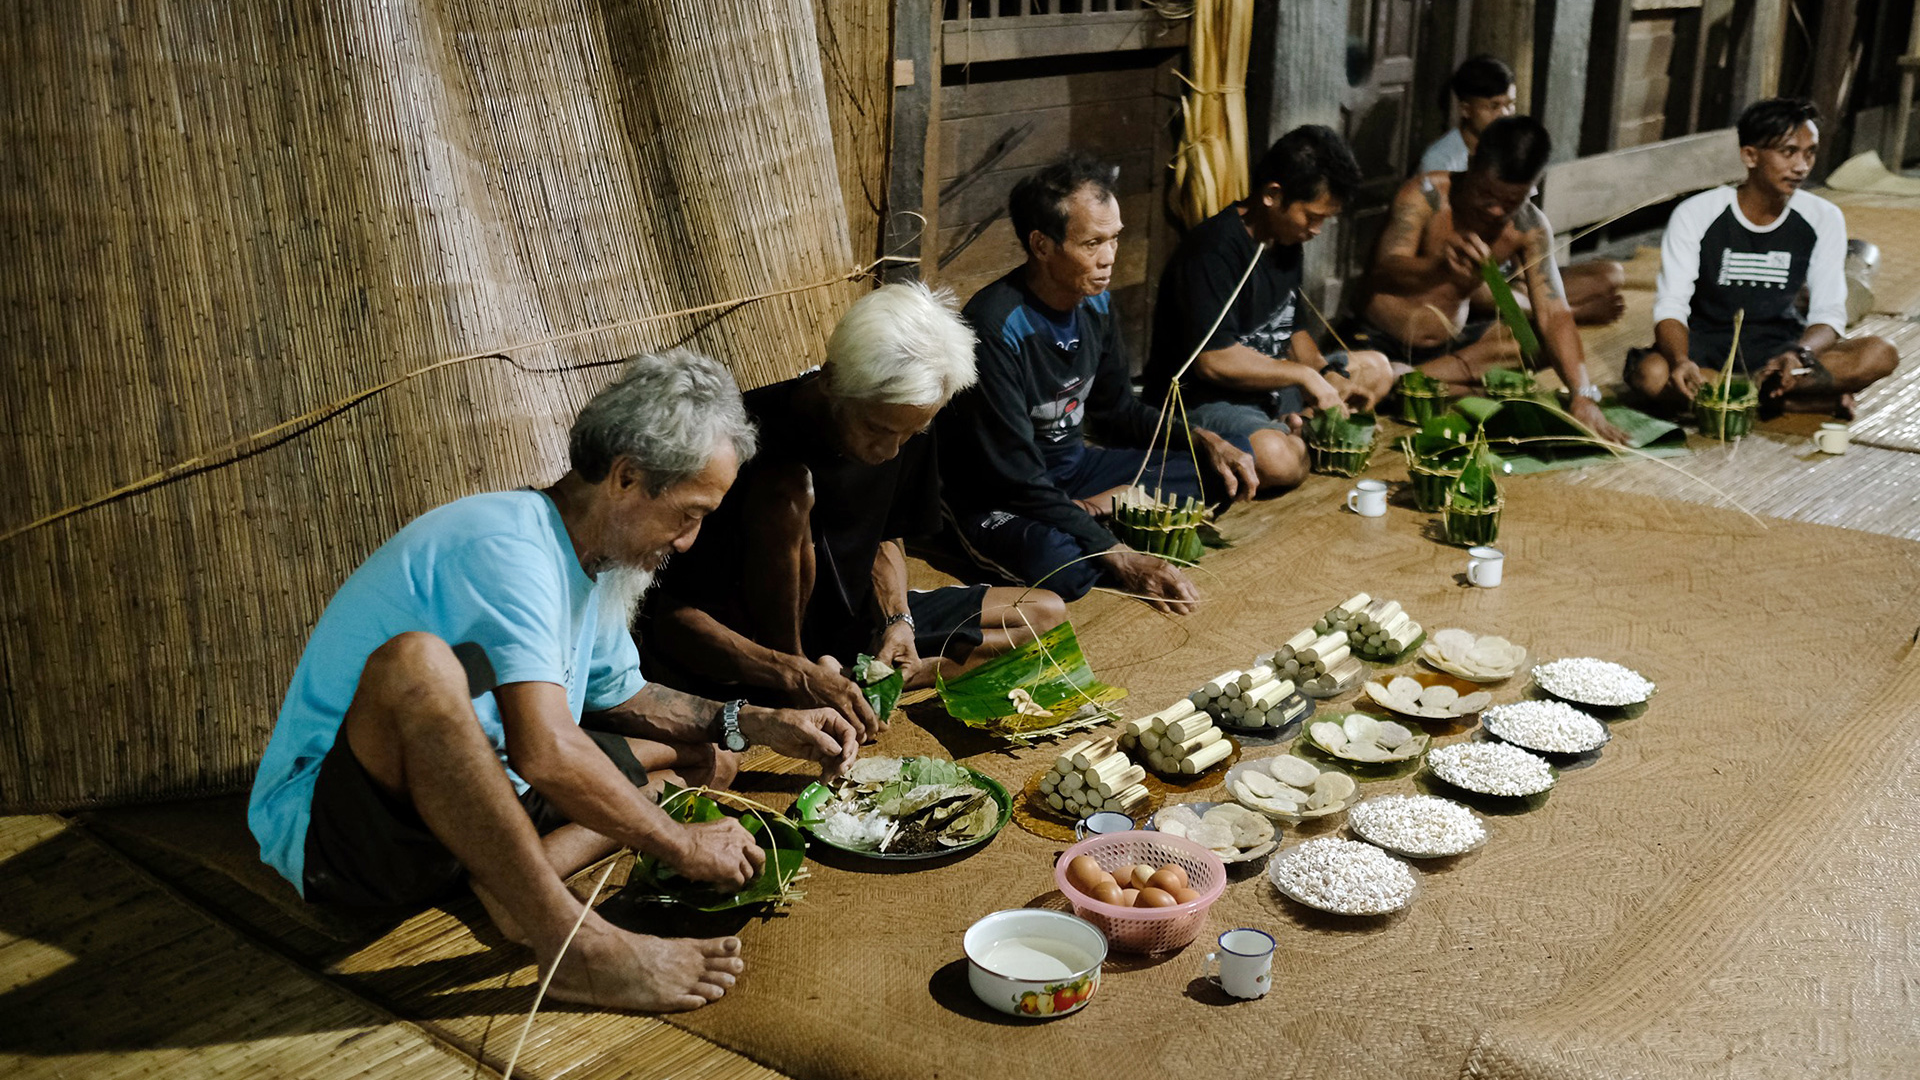 Members of the Dayak Iban group in the Sungai Utik community, where they live in a longhouse that serves as a space for collective decision-making.